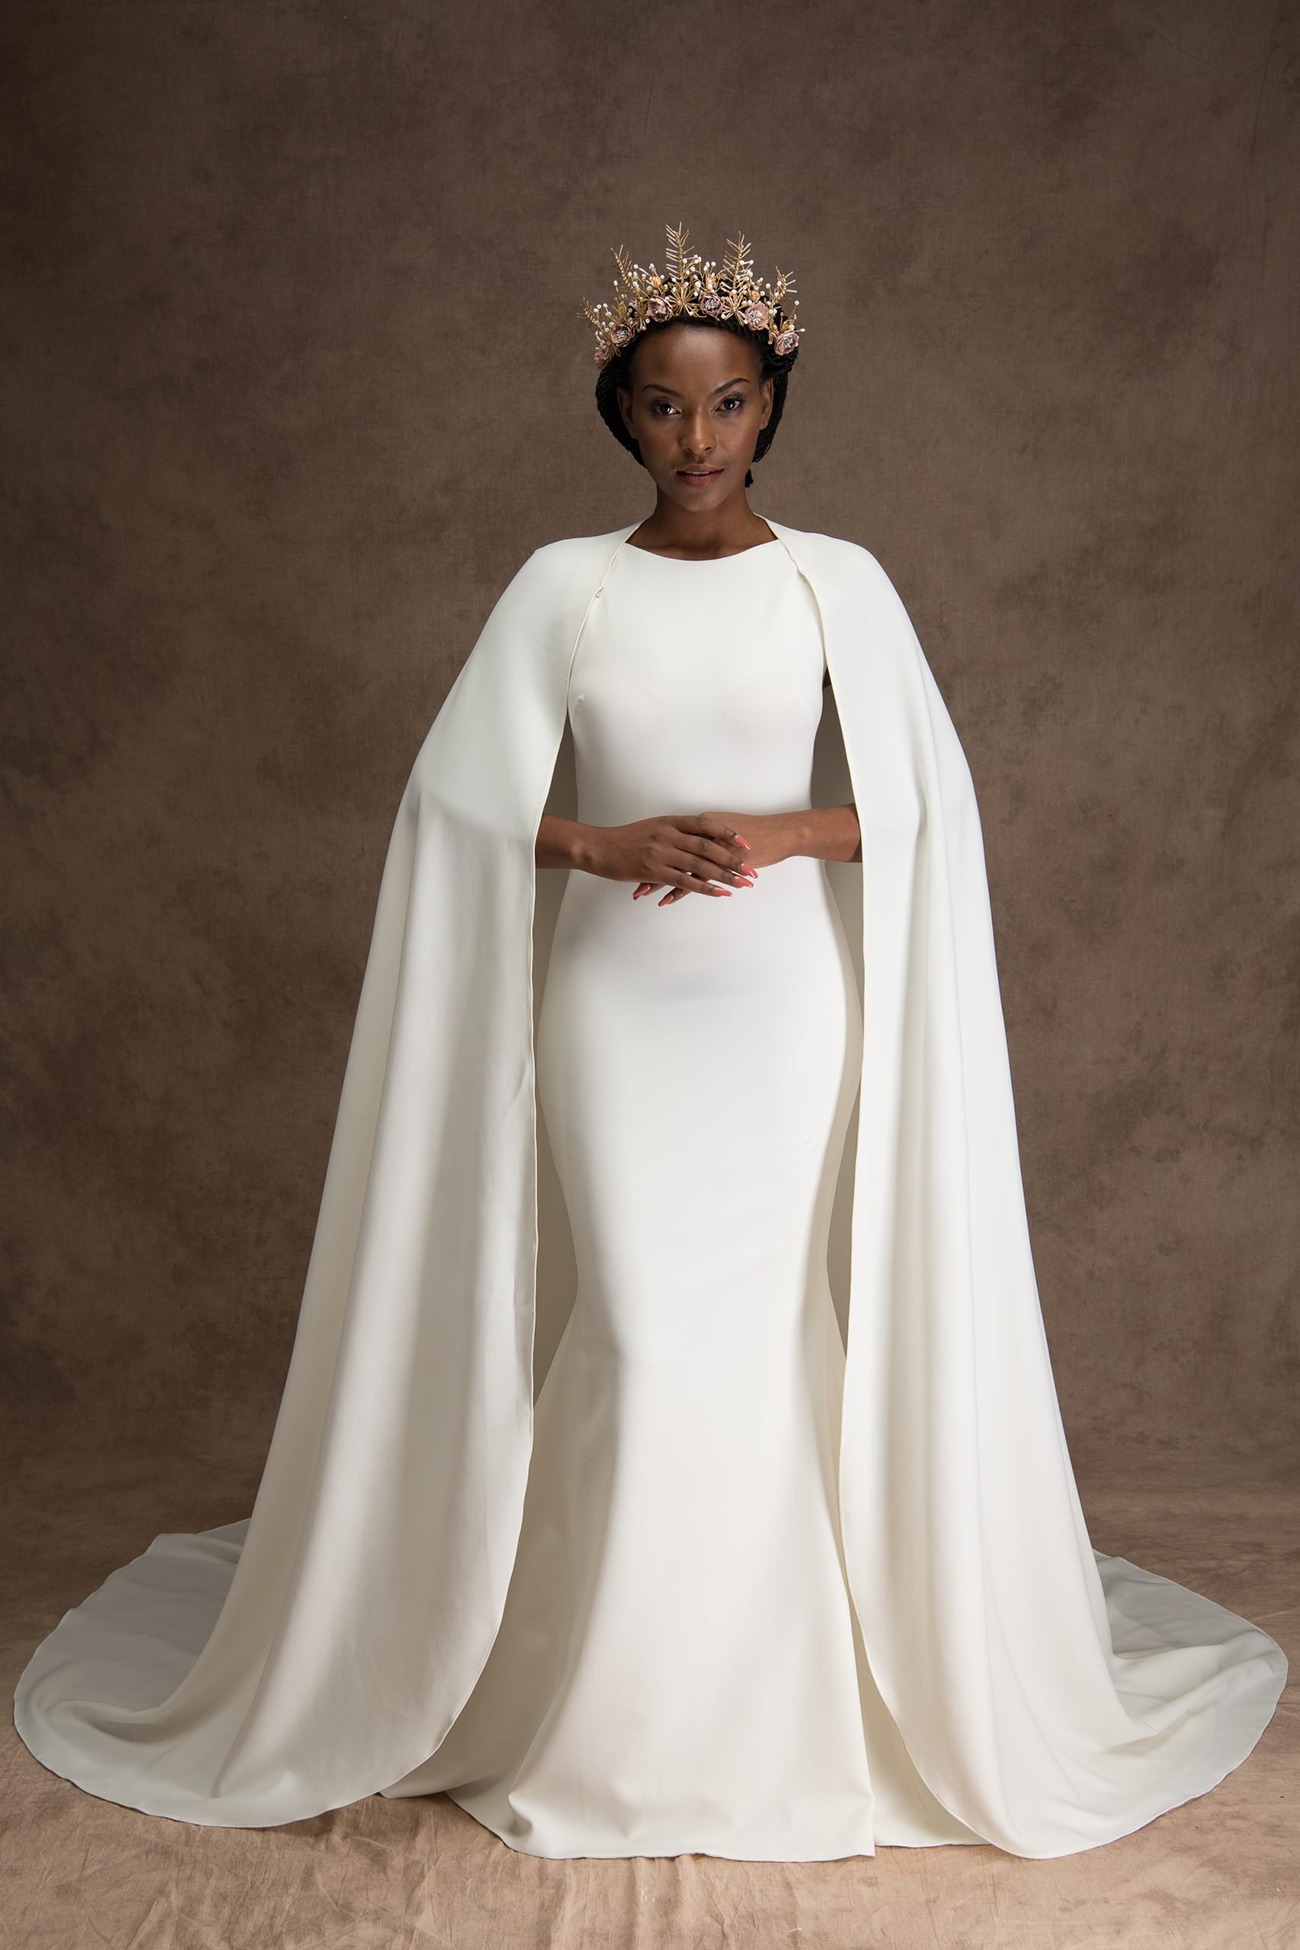 dramatic wedding dress with cape-like floor length sleeves and minimalist fitted bodice